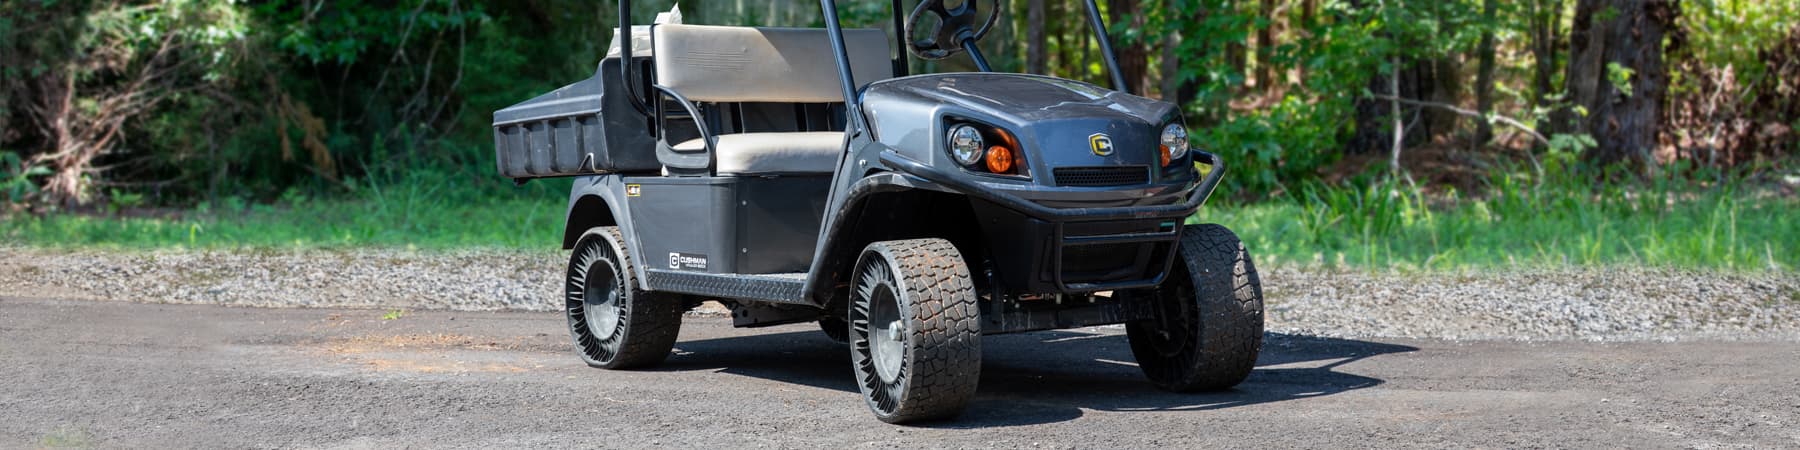 Tweel Tires for Golf Carts and Utility Carts